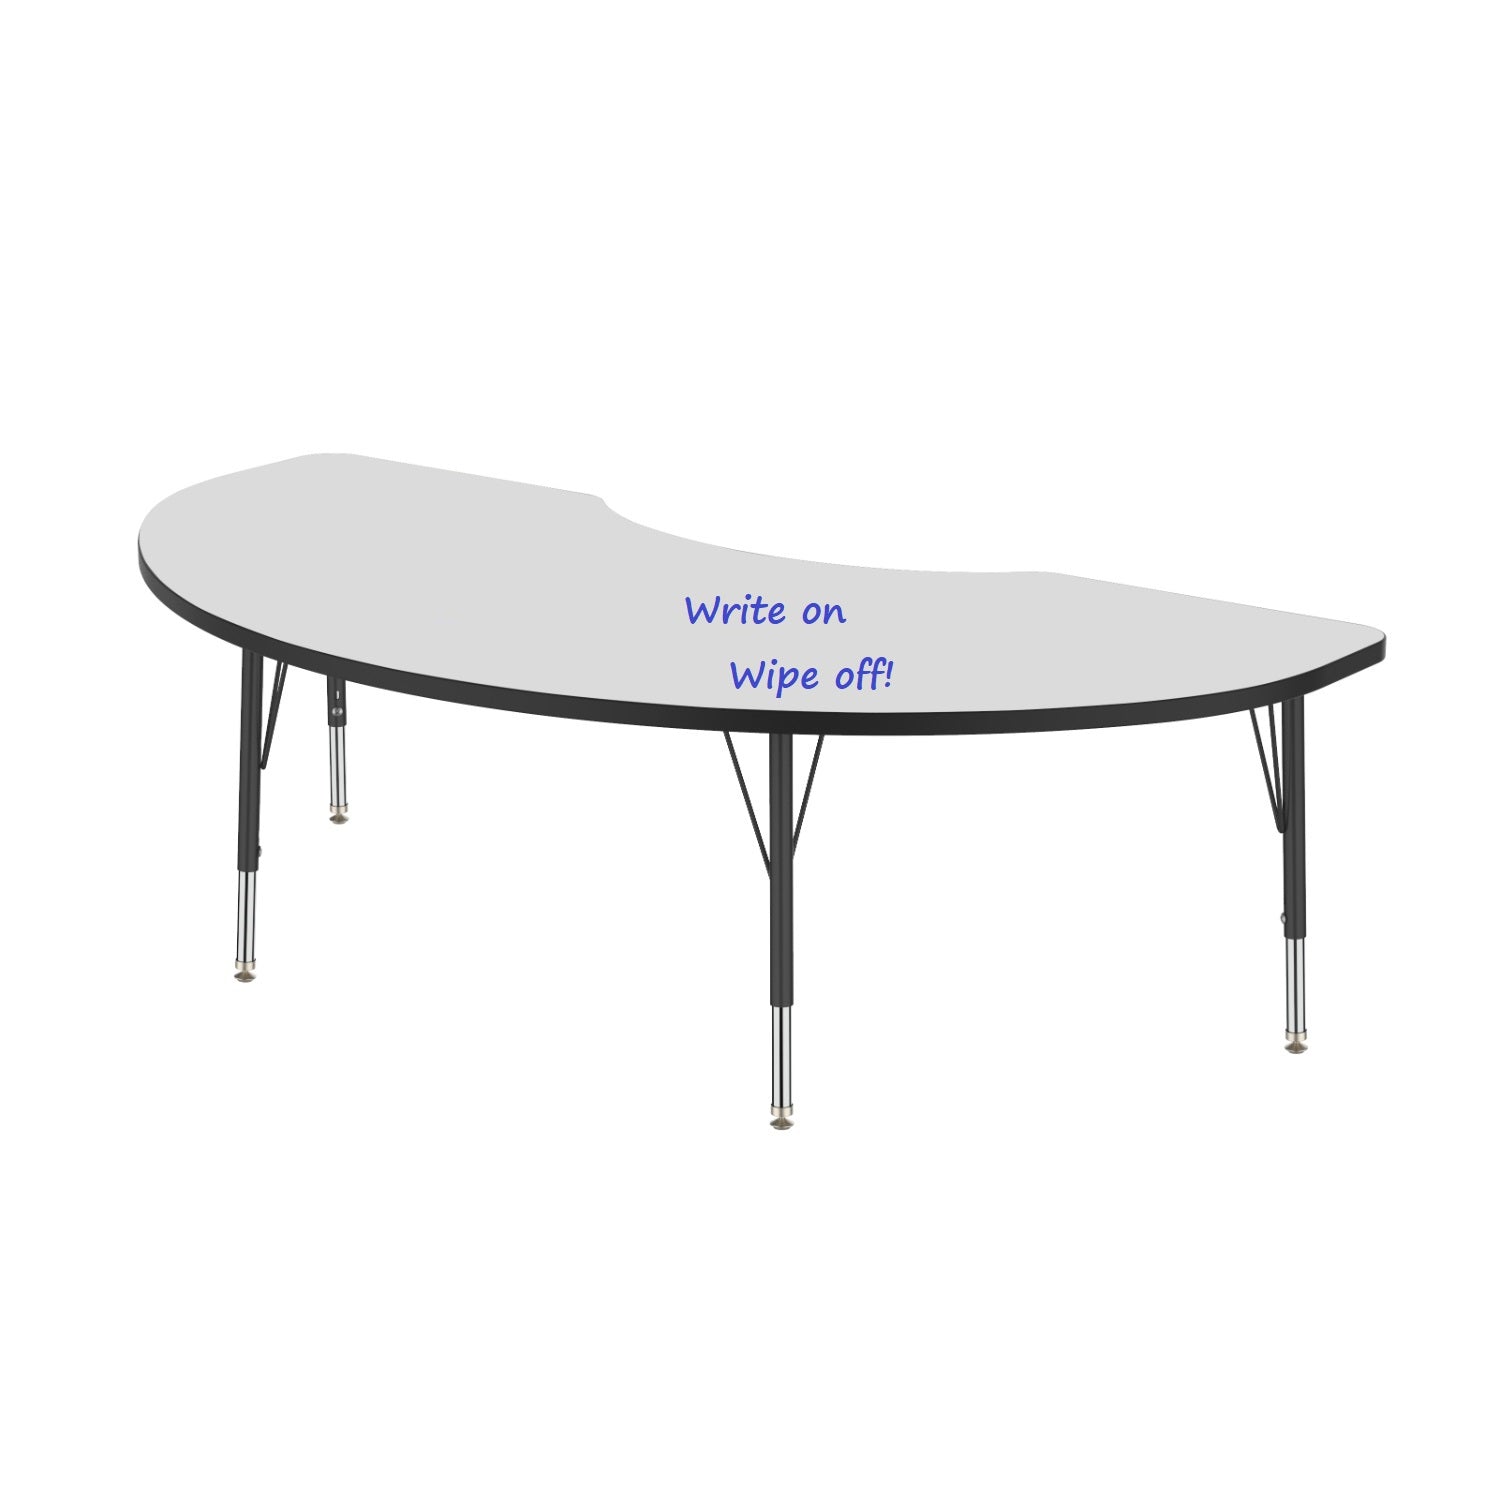 MG Series Adjustable Height Activity Table with White Dry Erase Markerboard Top, 36" x 72" Kidney